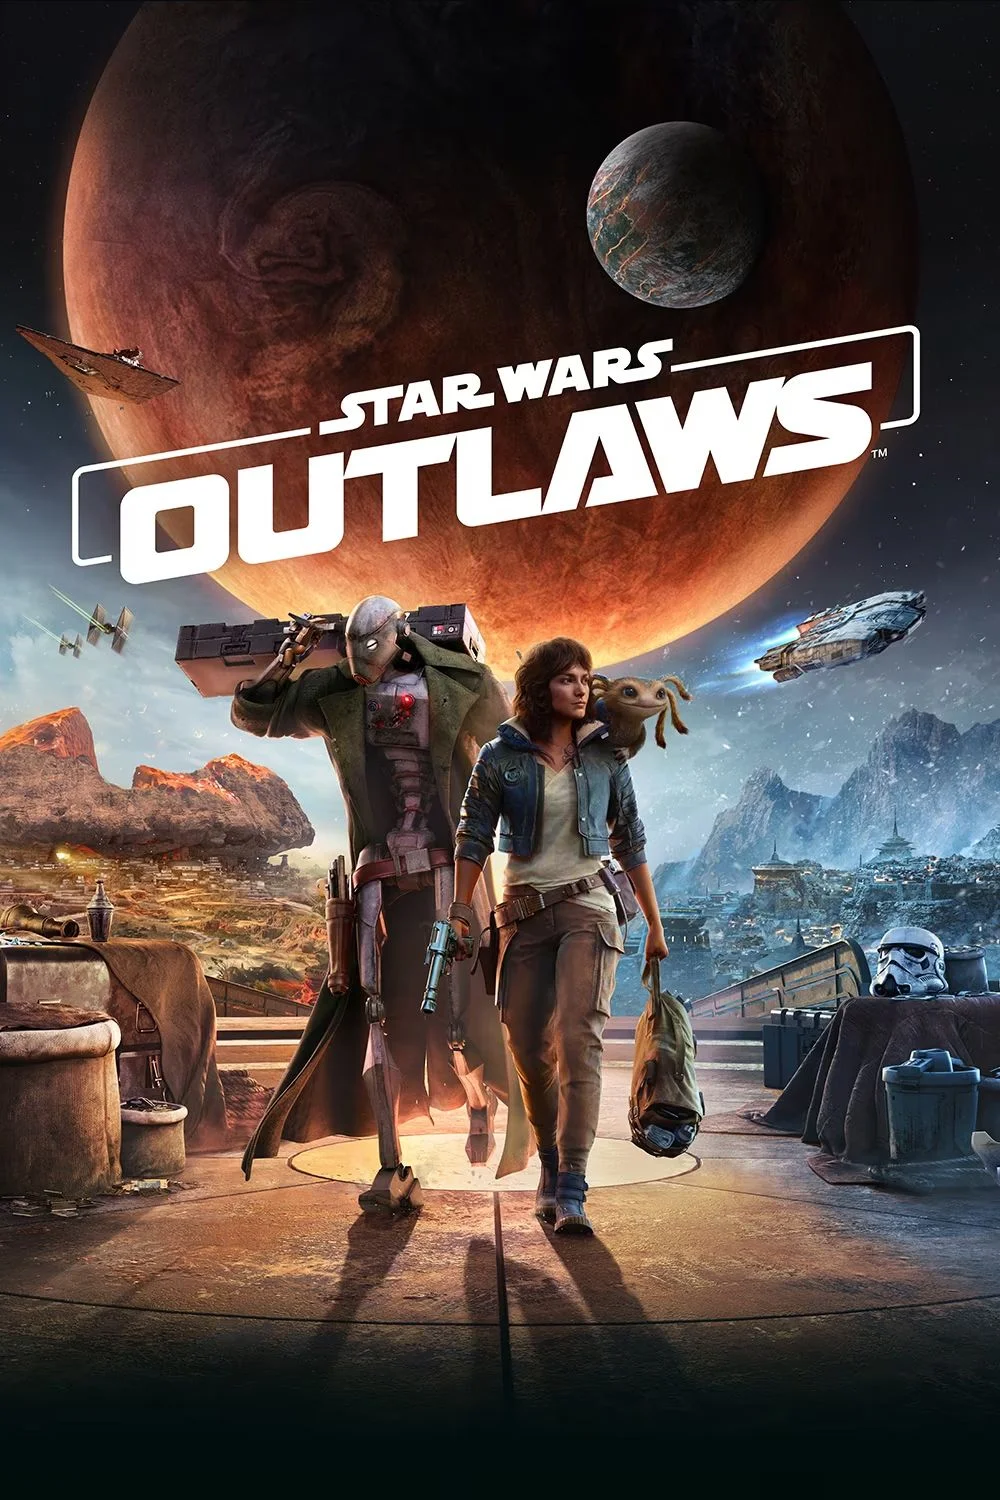 Star Wars Outlaws
